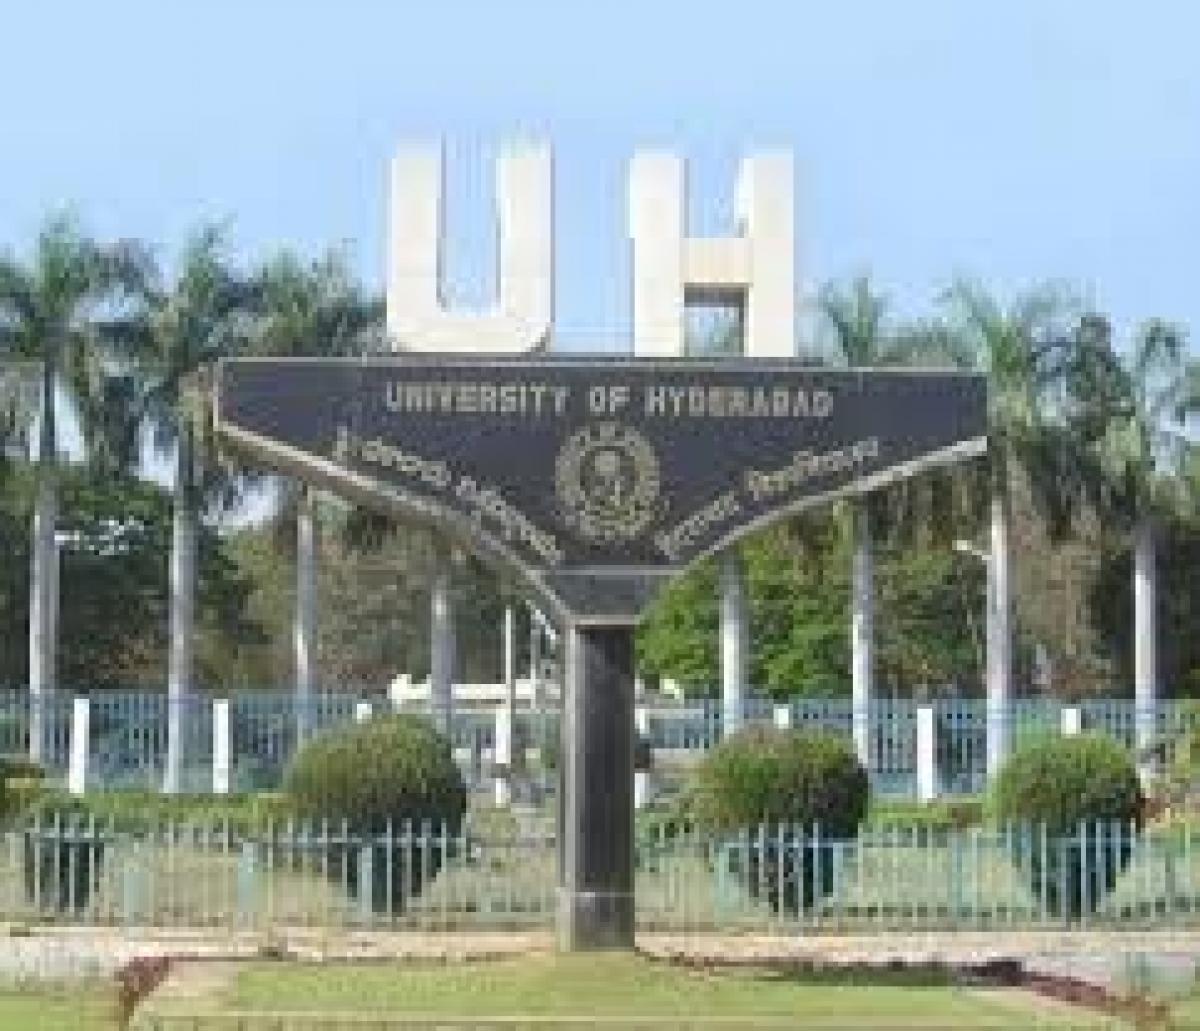 UoH faculty members, students granted bail